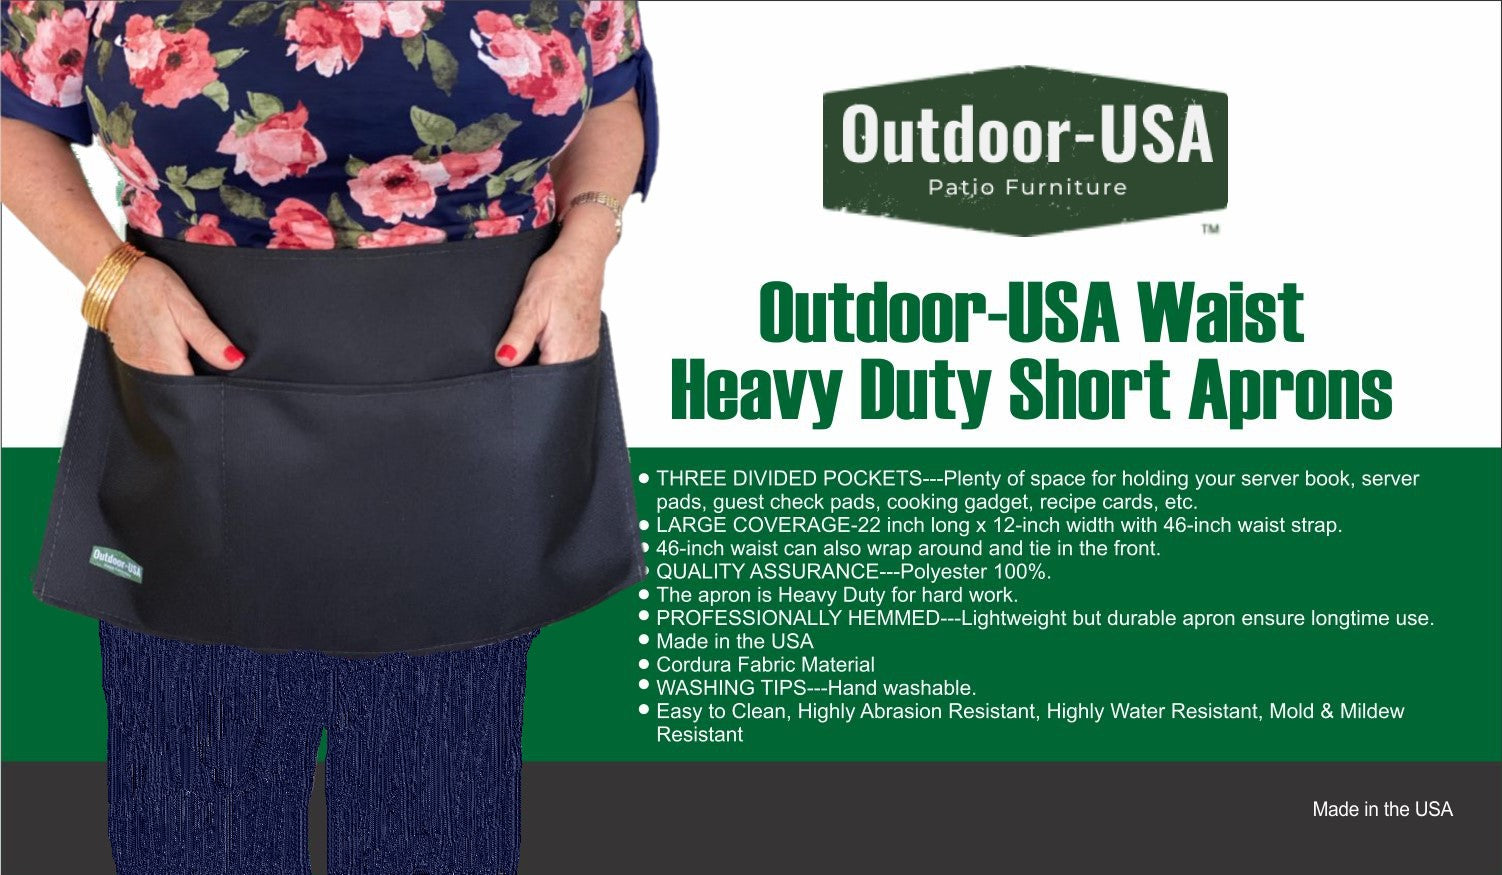 Outdoor-USA Waist Heavy Duty Short Aprons - Made in USA